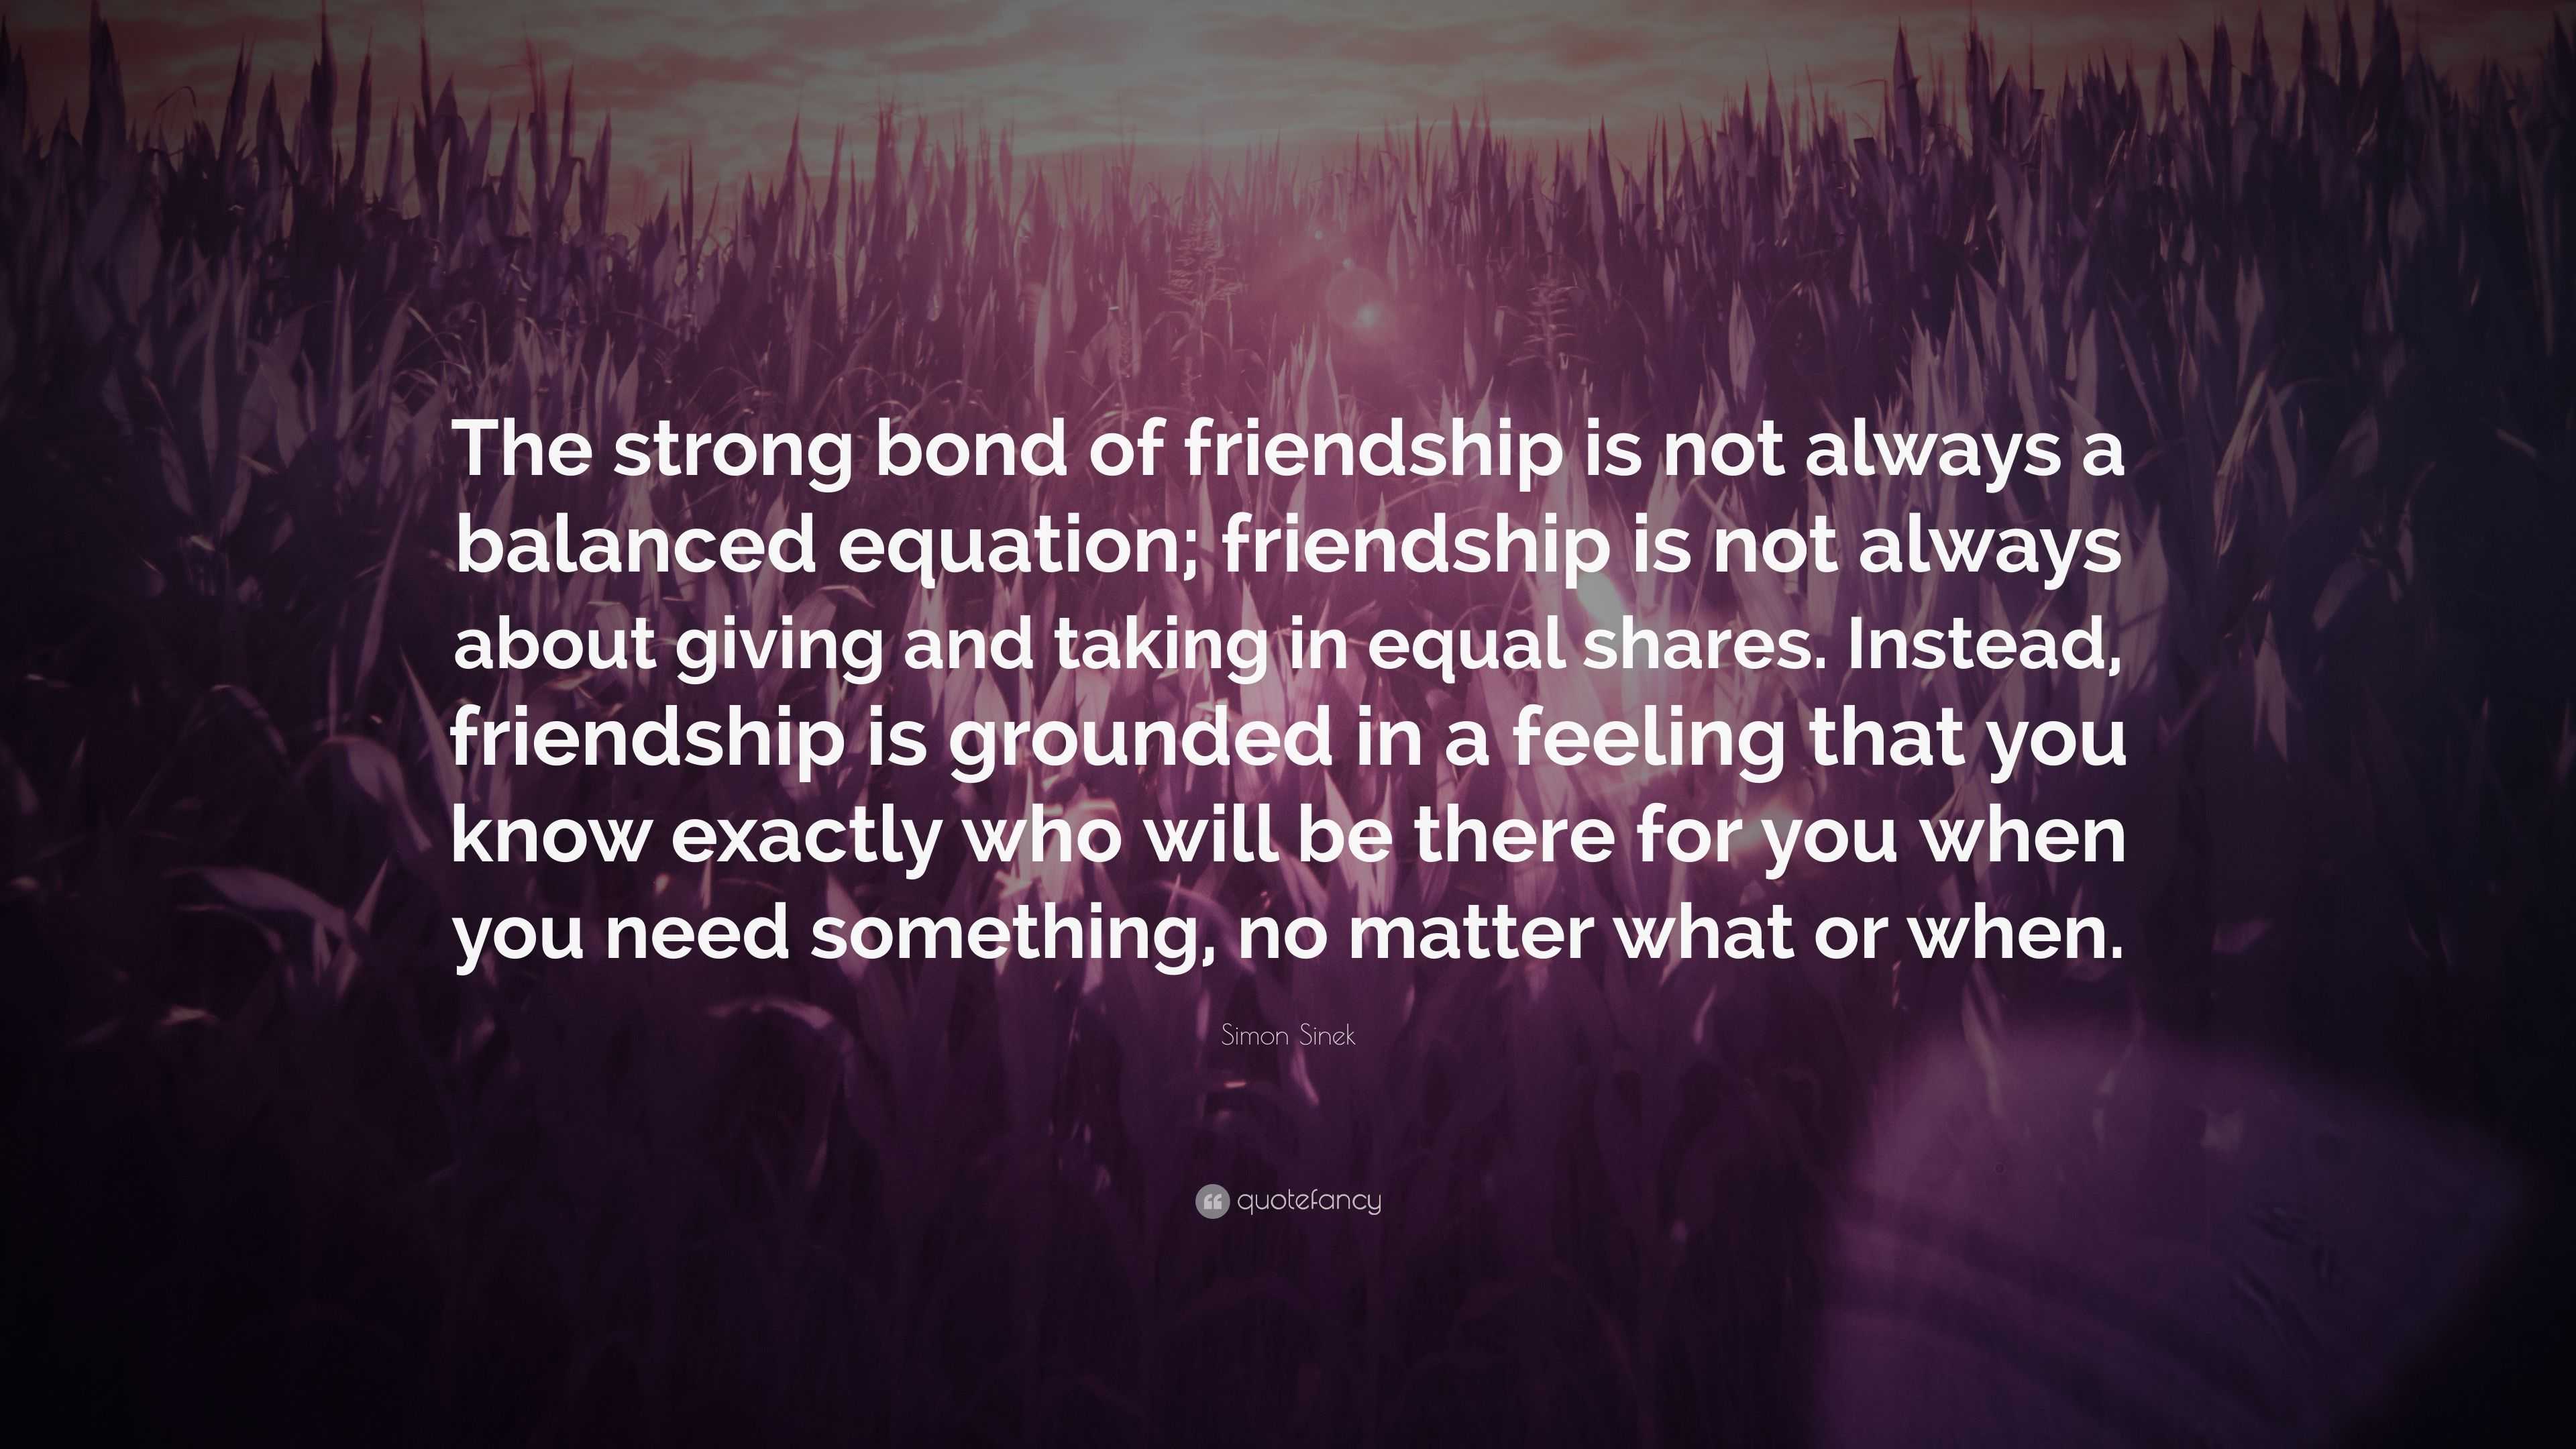 Quotes On Strong Friendship Bonds | Master trick